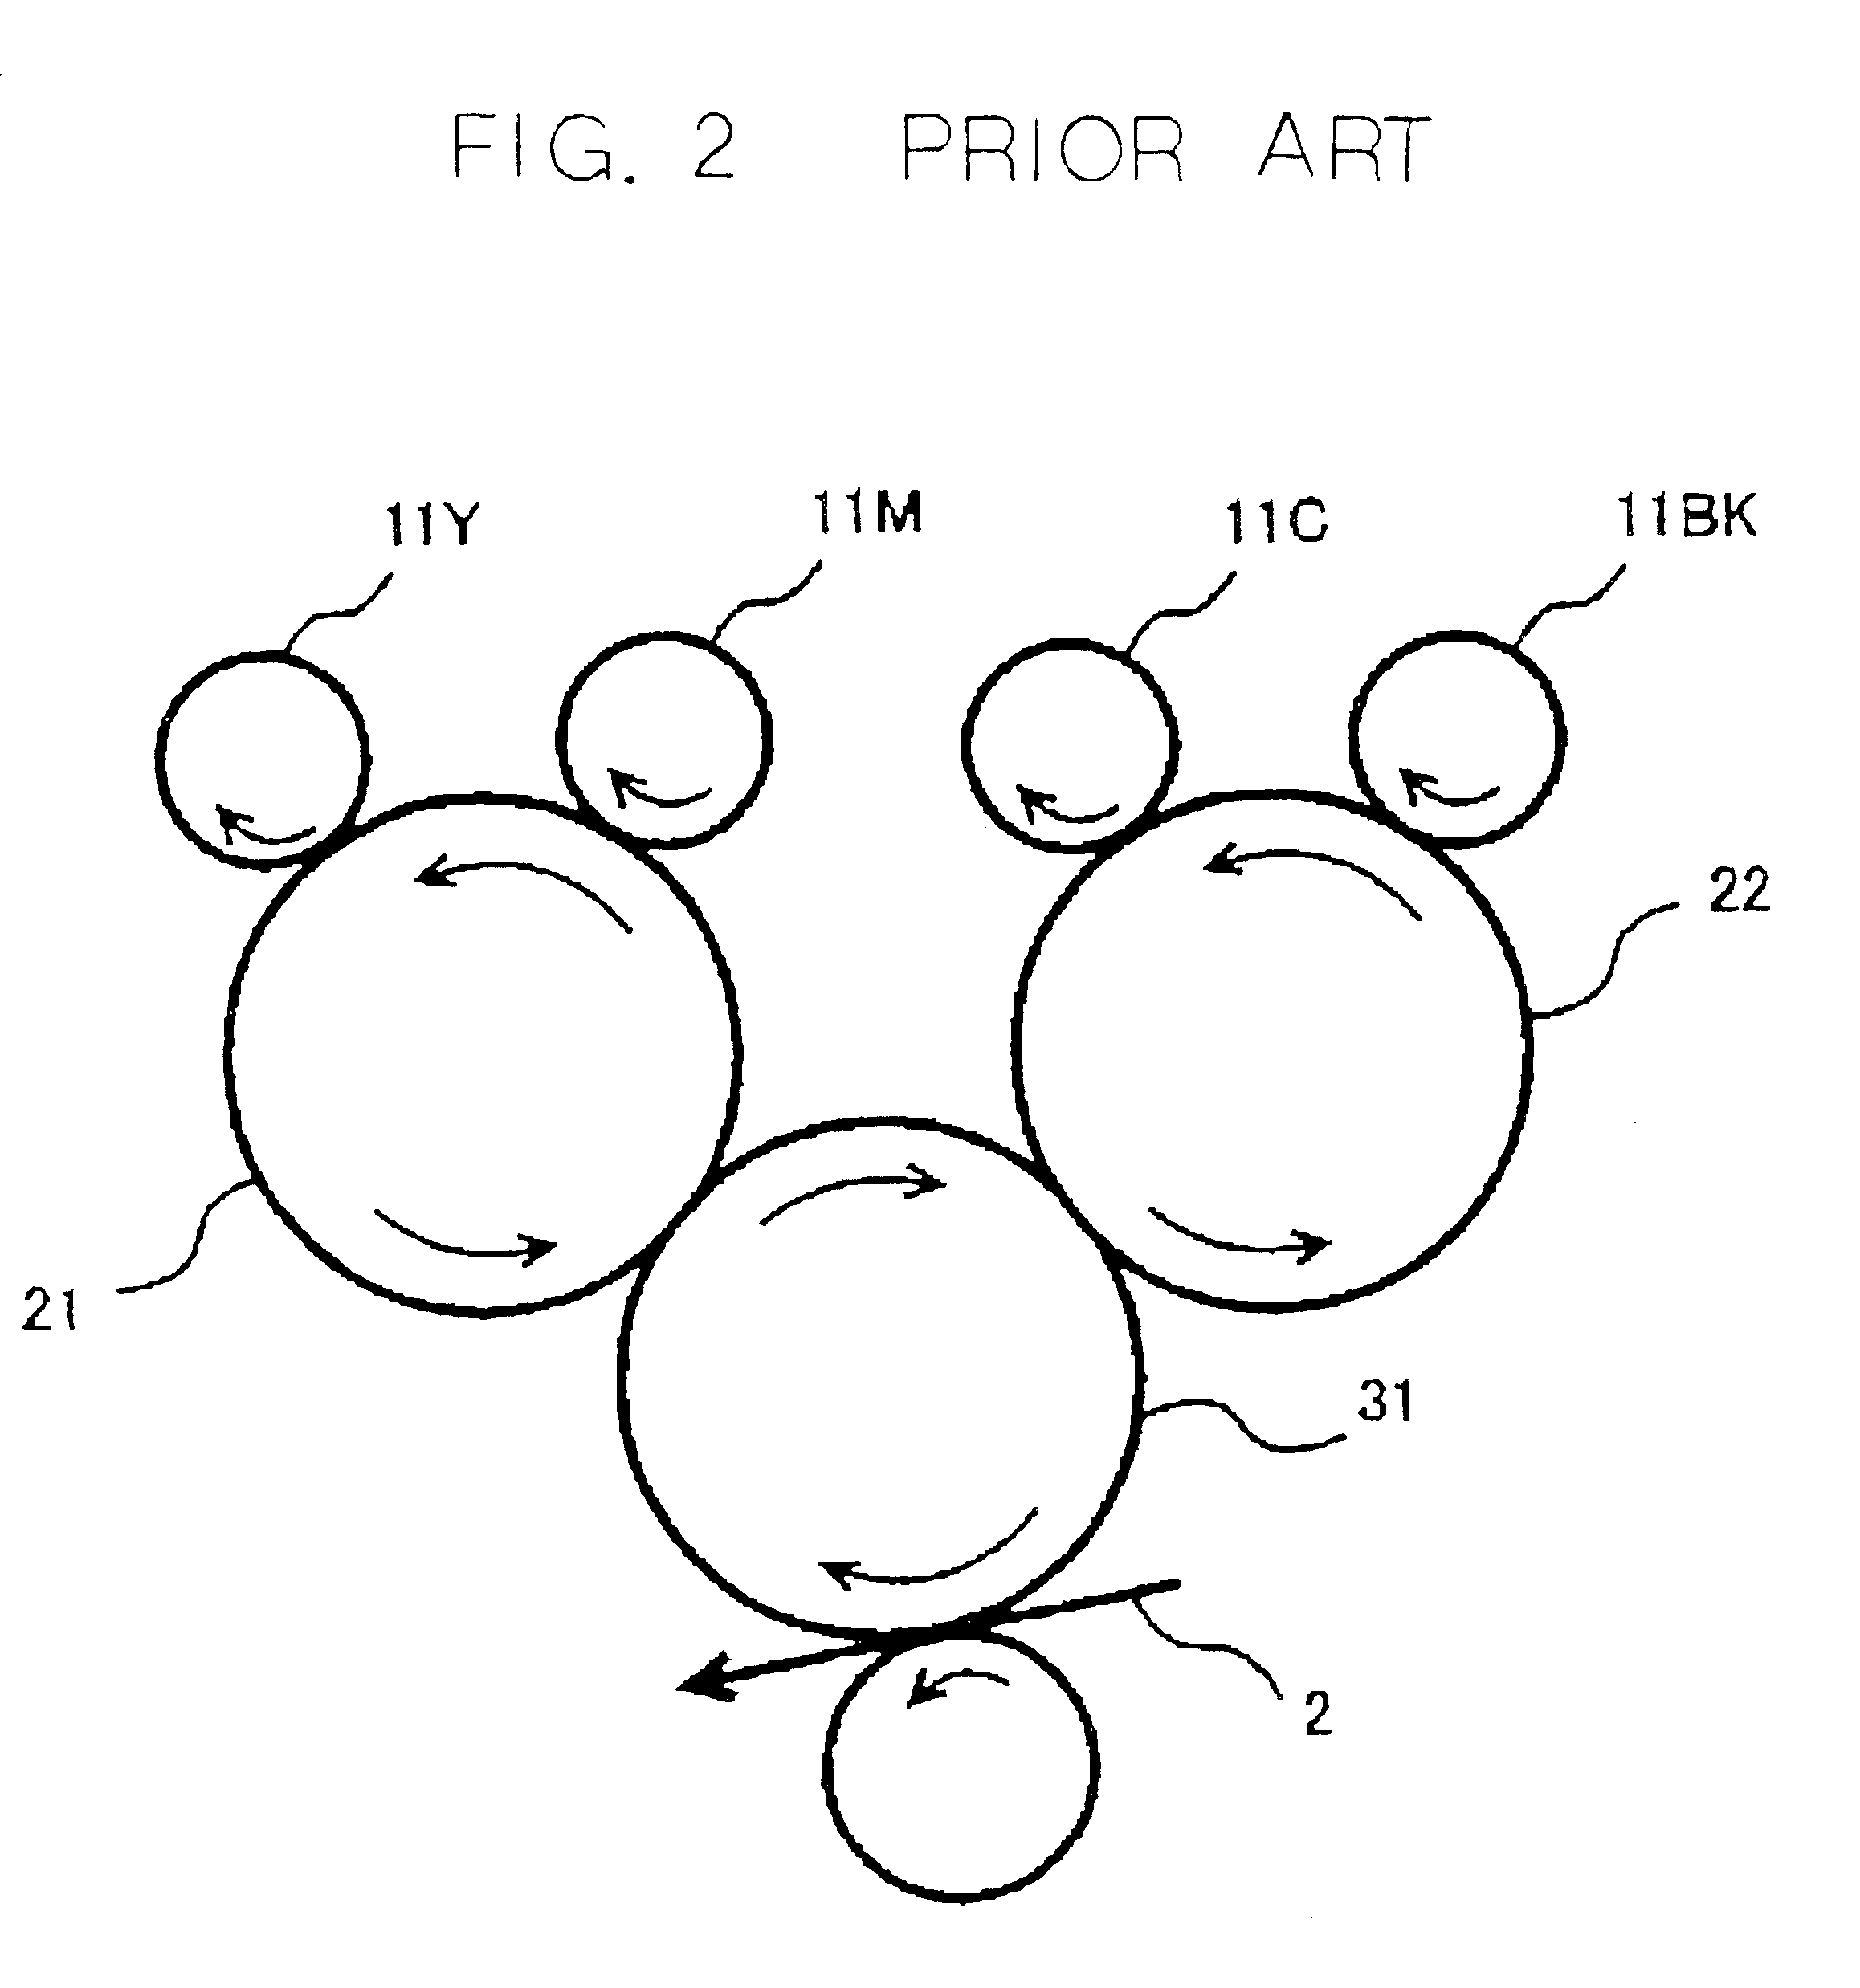 Image forming apparatus with an intermediate image transfer body and provisions for correcting image transfer distortions